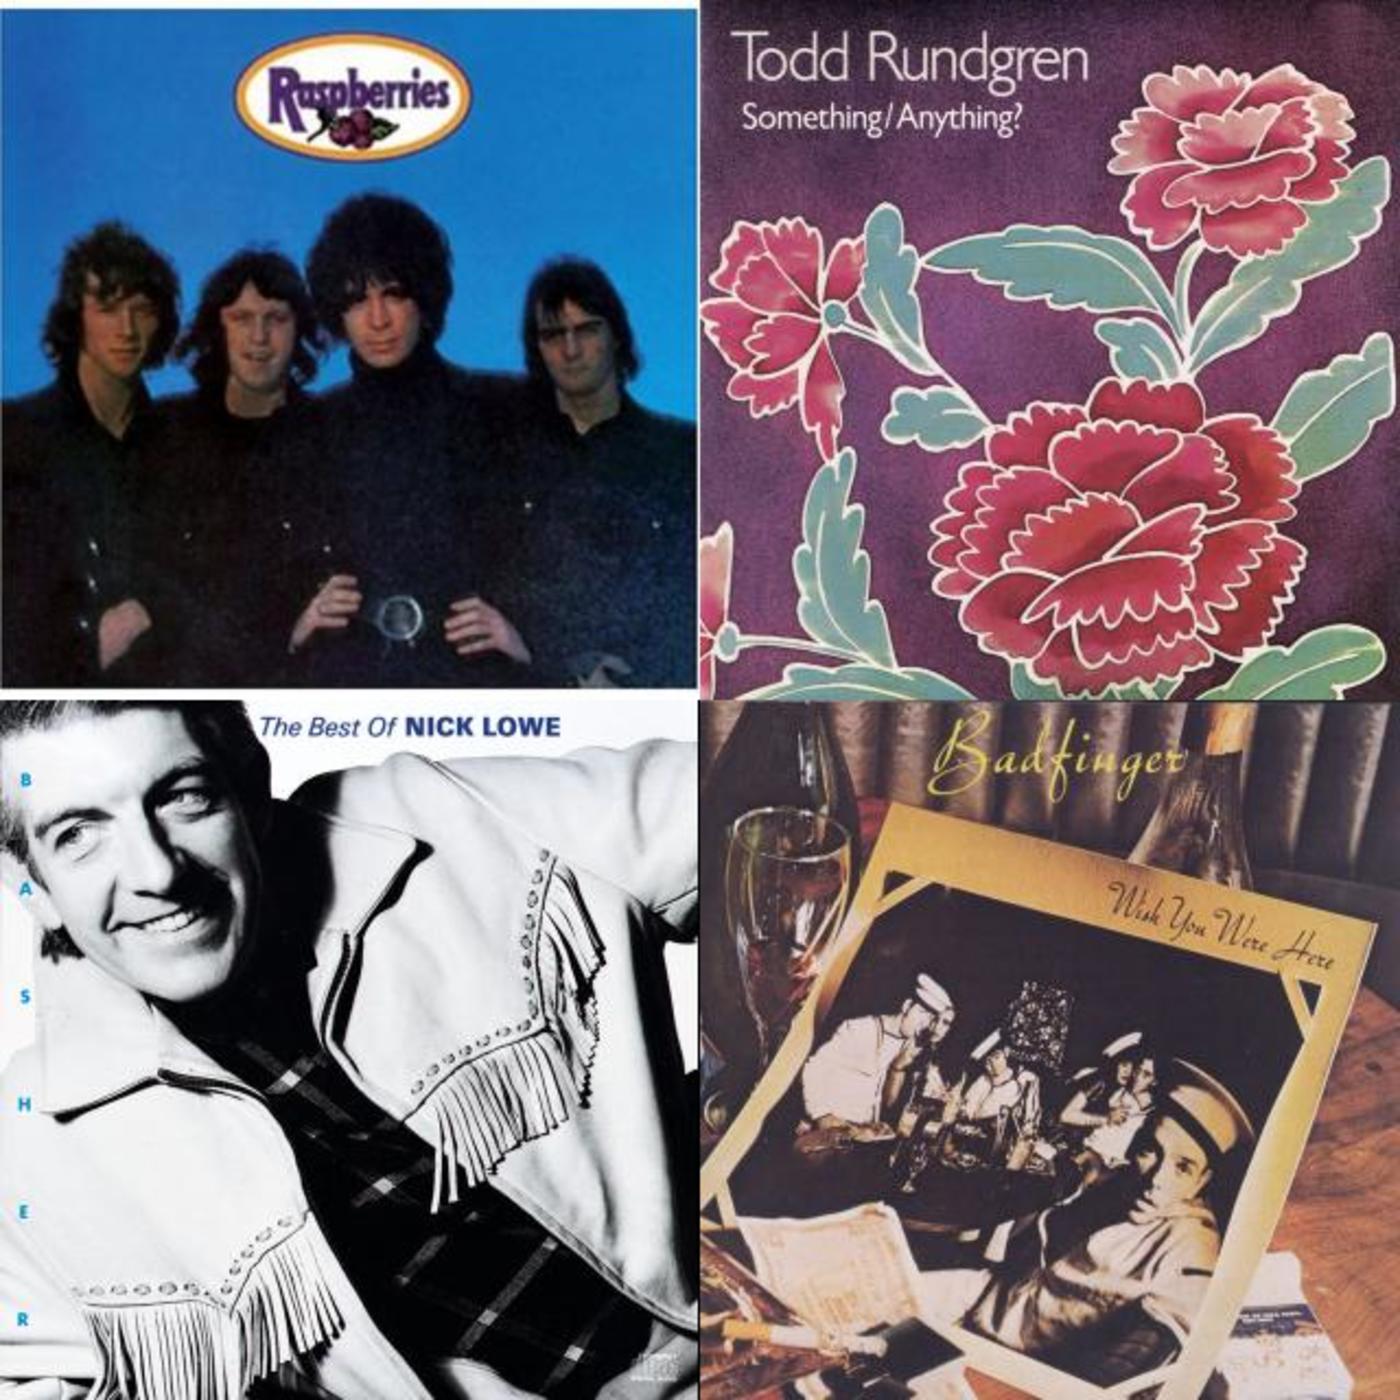 Poptopia - Badfinger, Nick Lowe, The Raspberries, Todd Rundgren, Cheap Trick, The Knack, Big Star, Flamin' Groovies, The Records, Shoes, The Rubinoos, Fotomaker, Let's Active